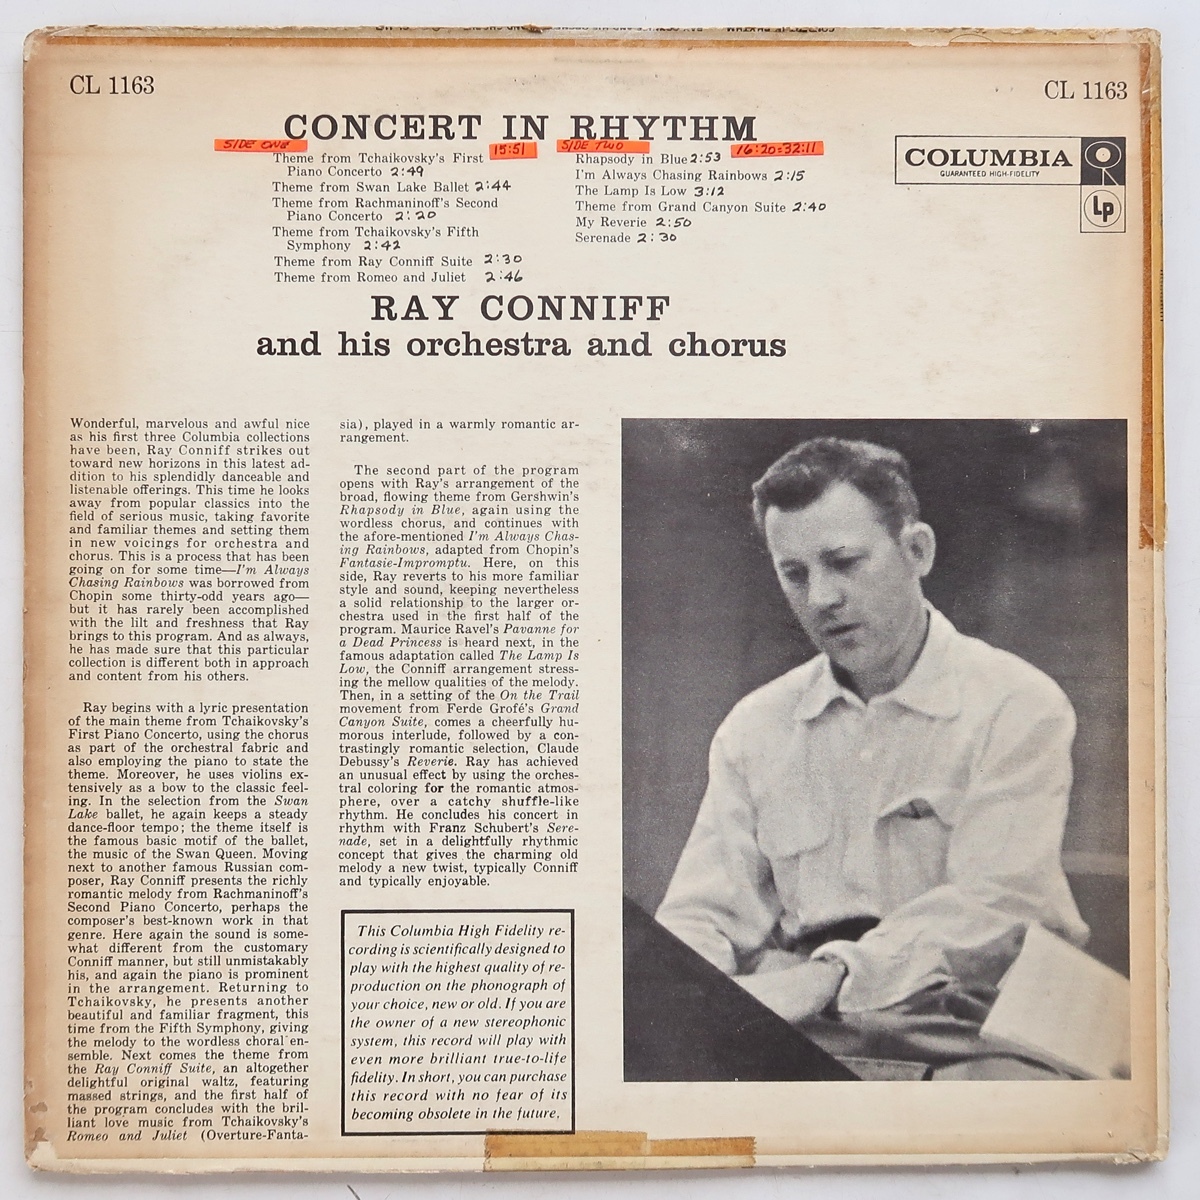 LP RAY CONNIFF AND HIS ORCHESTRA AND CHORUS CONCERT IN RHYTHM CL 1163 米盤 6EYES MONO ジャケット難あり_画像2